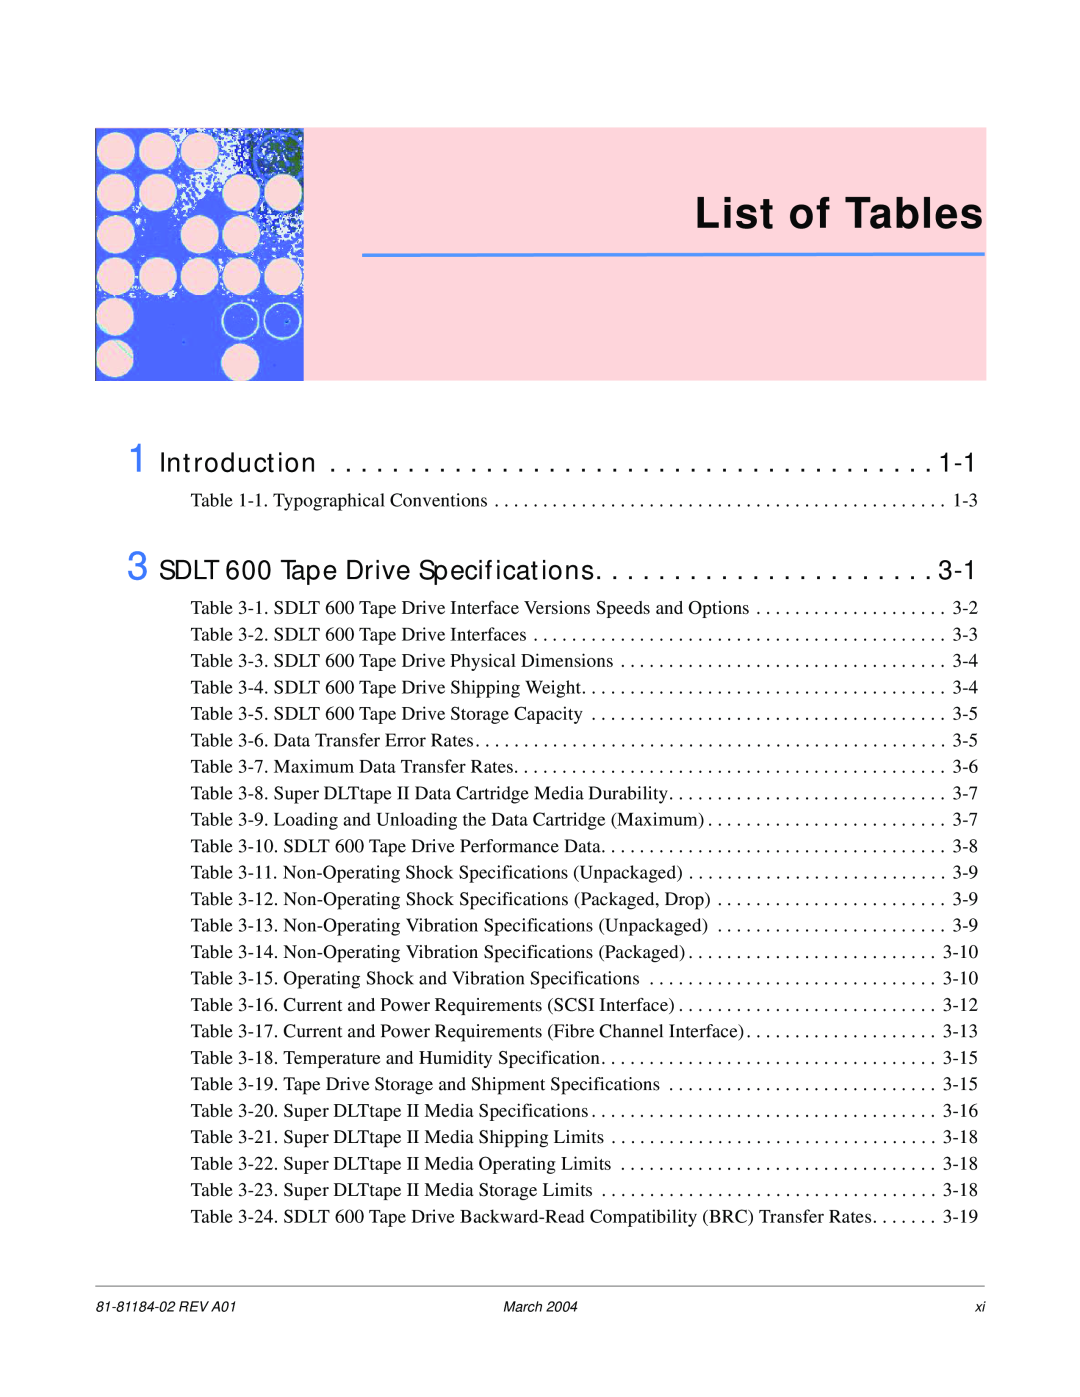 Tandberg Data manual List of Tables, Introduction, SDLT 600 Tape Drive Specifications, 1. Typographical Conventions 